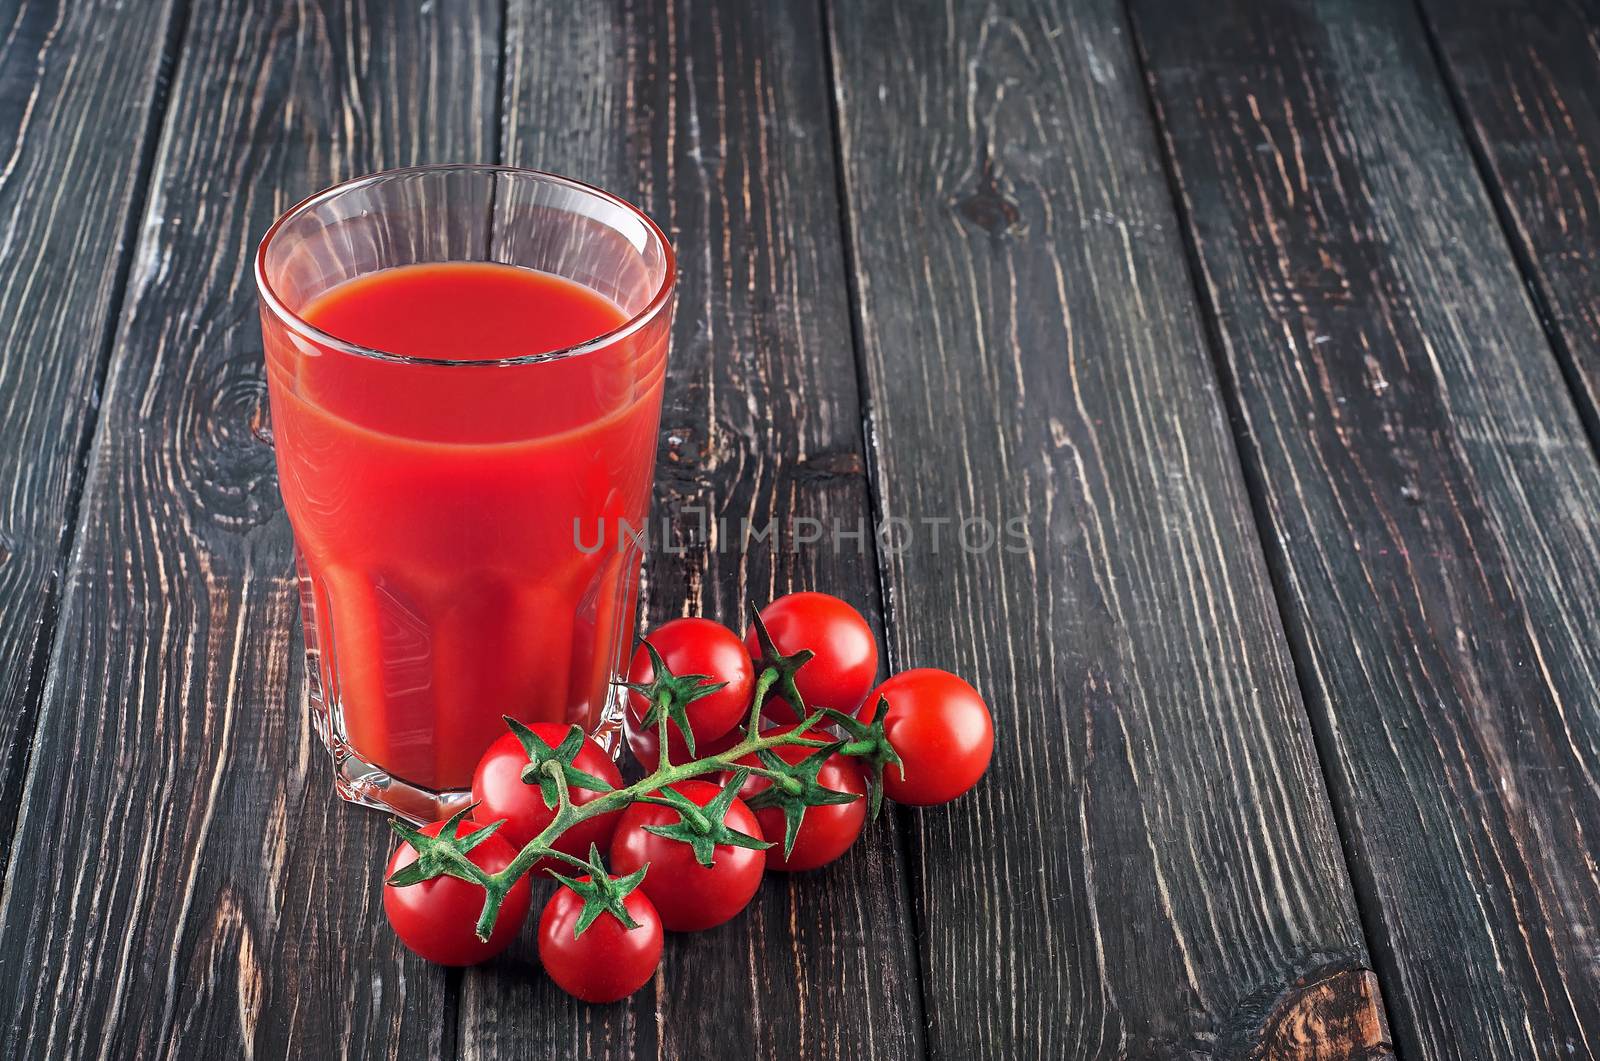 Tomato juice and cherry tomatoes by Cipariss